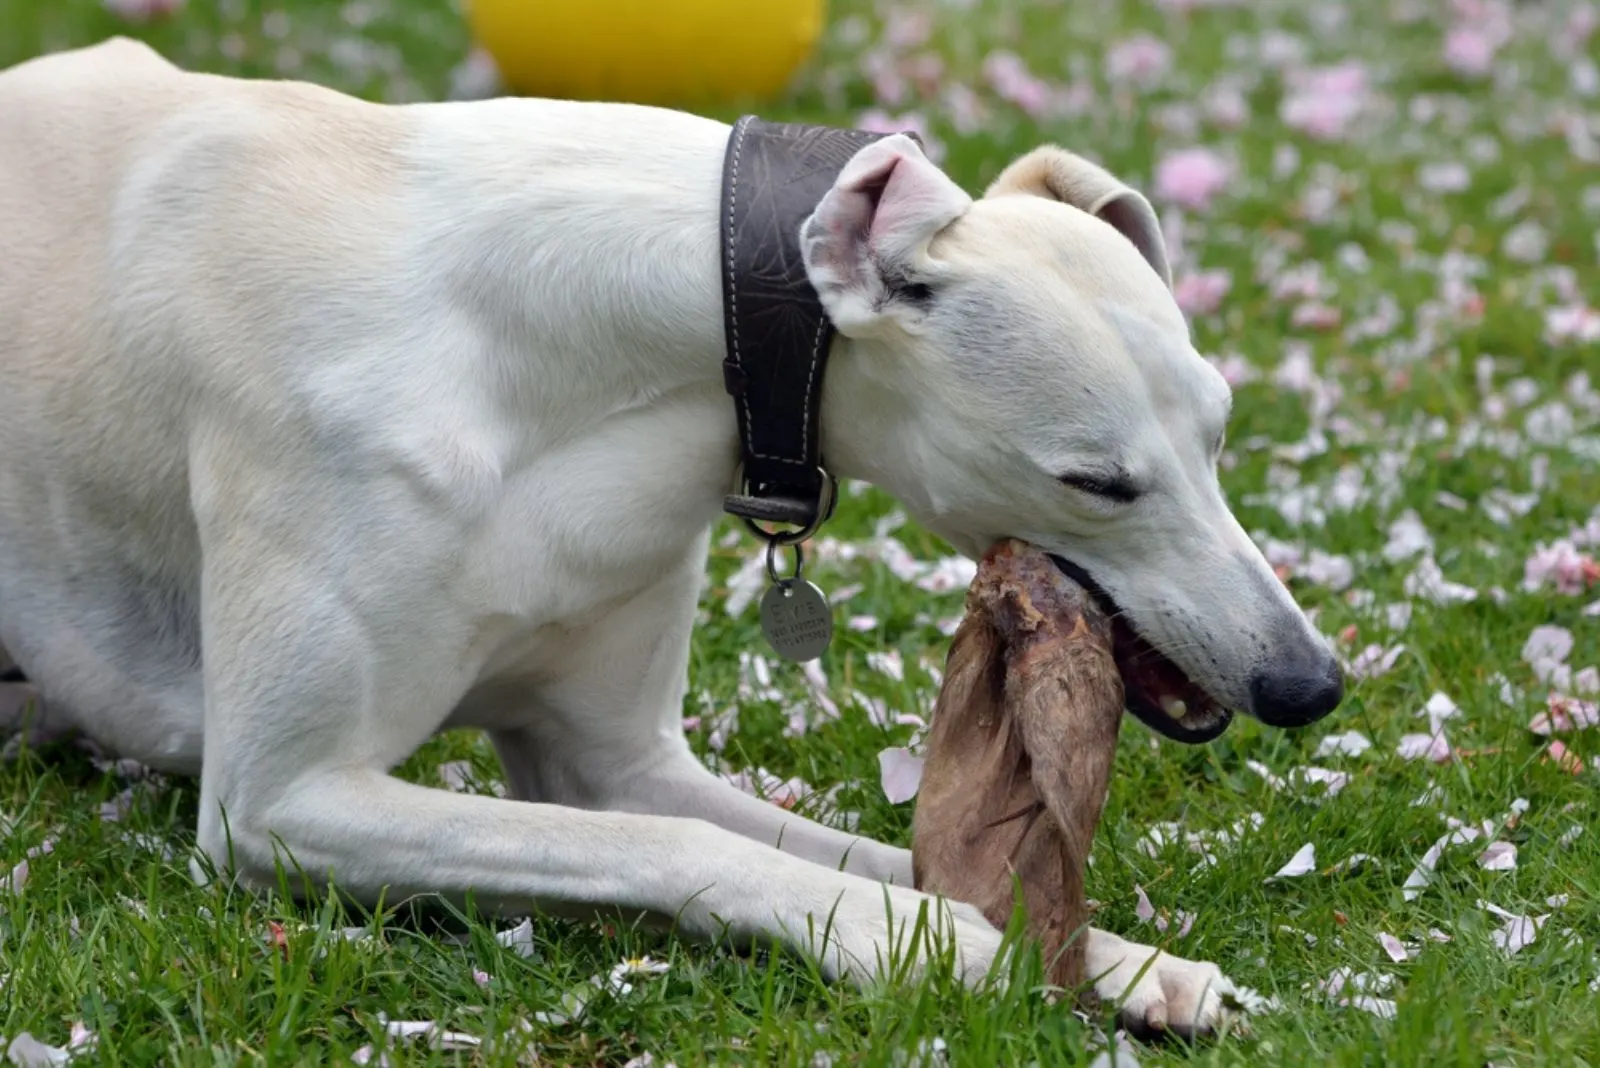 Bully Whippet eating a piece of meat